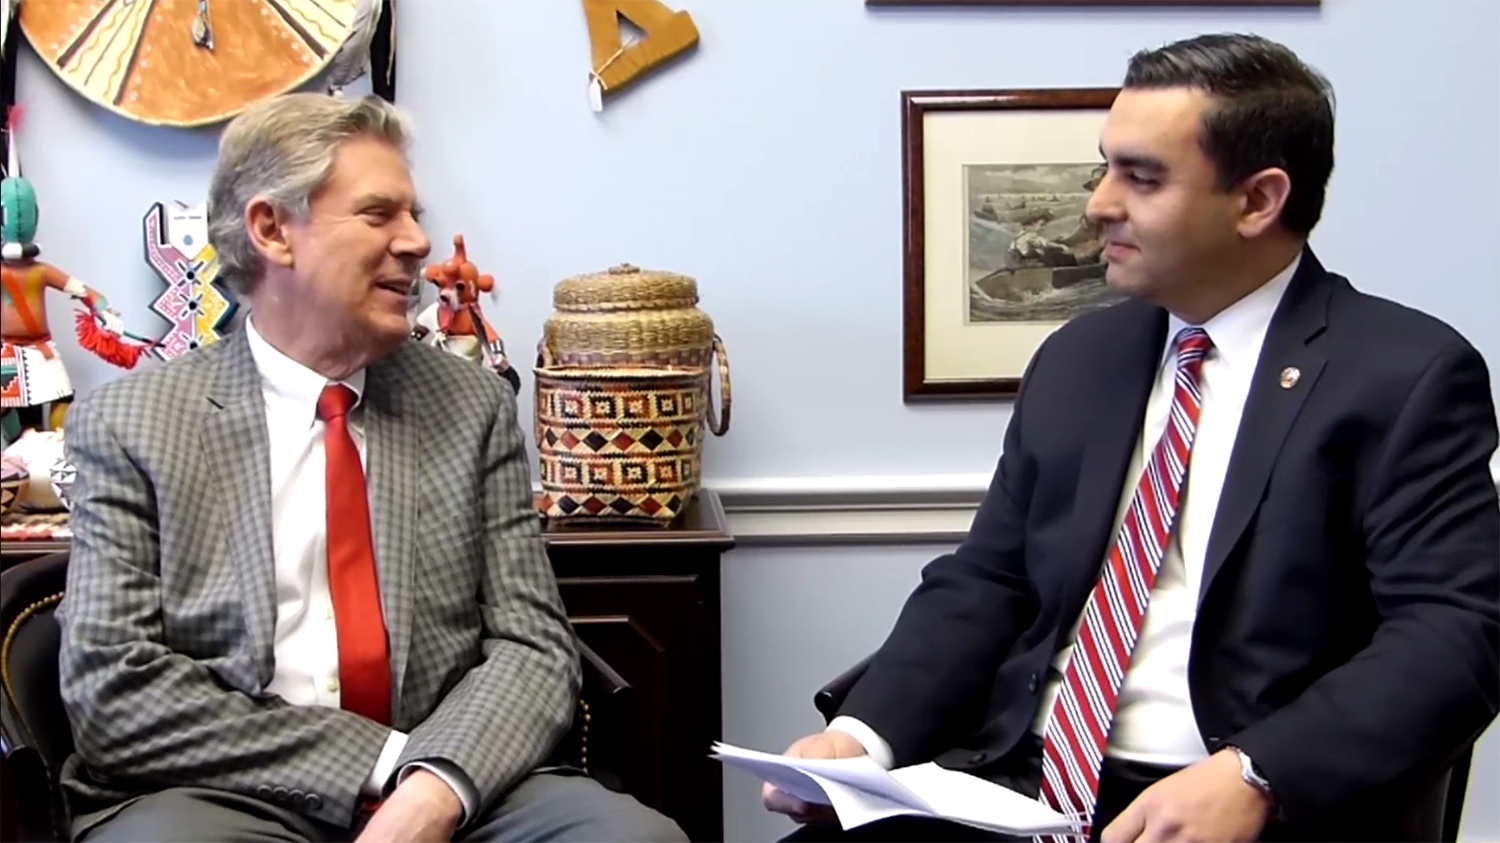 Rep. Pallone: Artsakh is the Epitome of Armenian